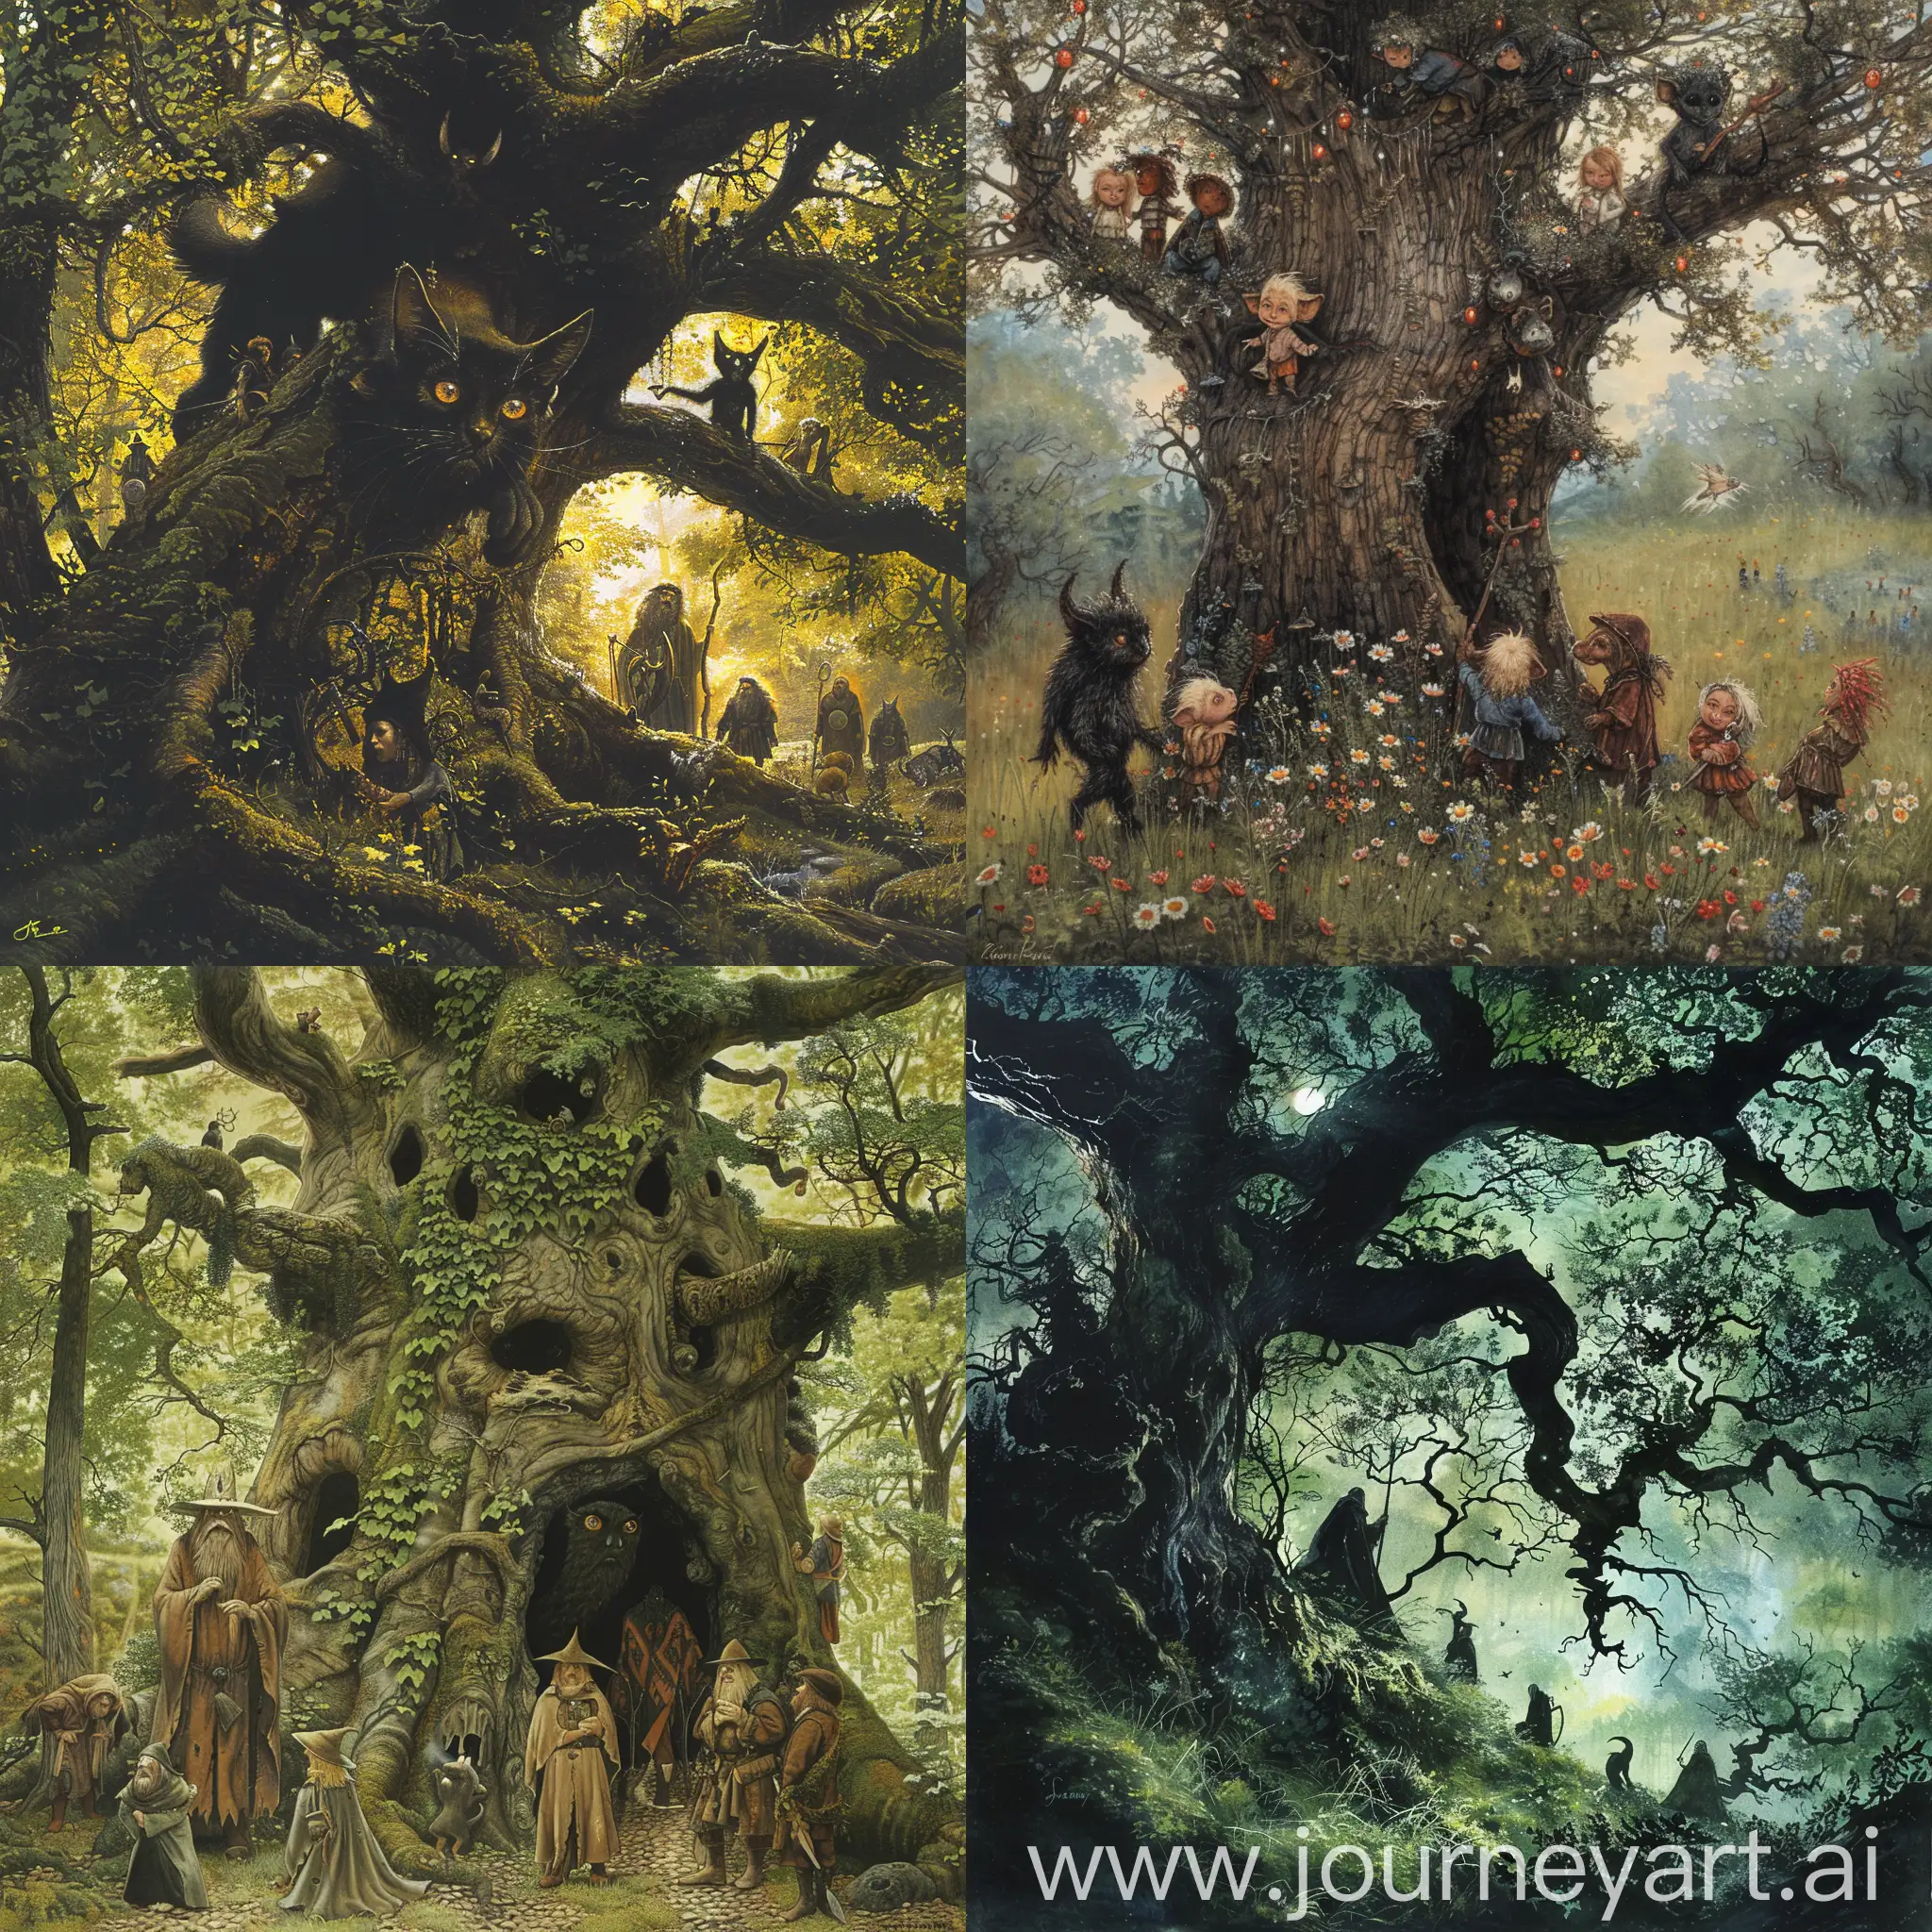 Enchanted-Forest-Scene-with-Druids-and-Black-Imp-on-Oak-Tree